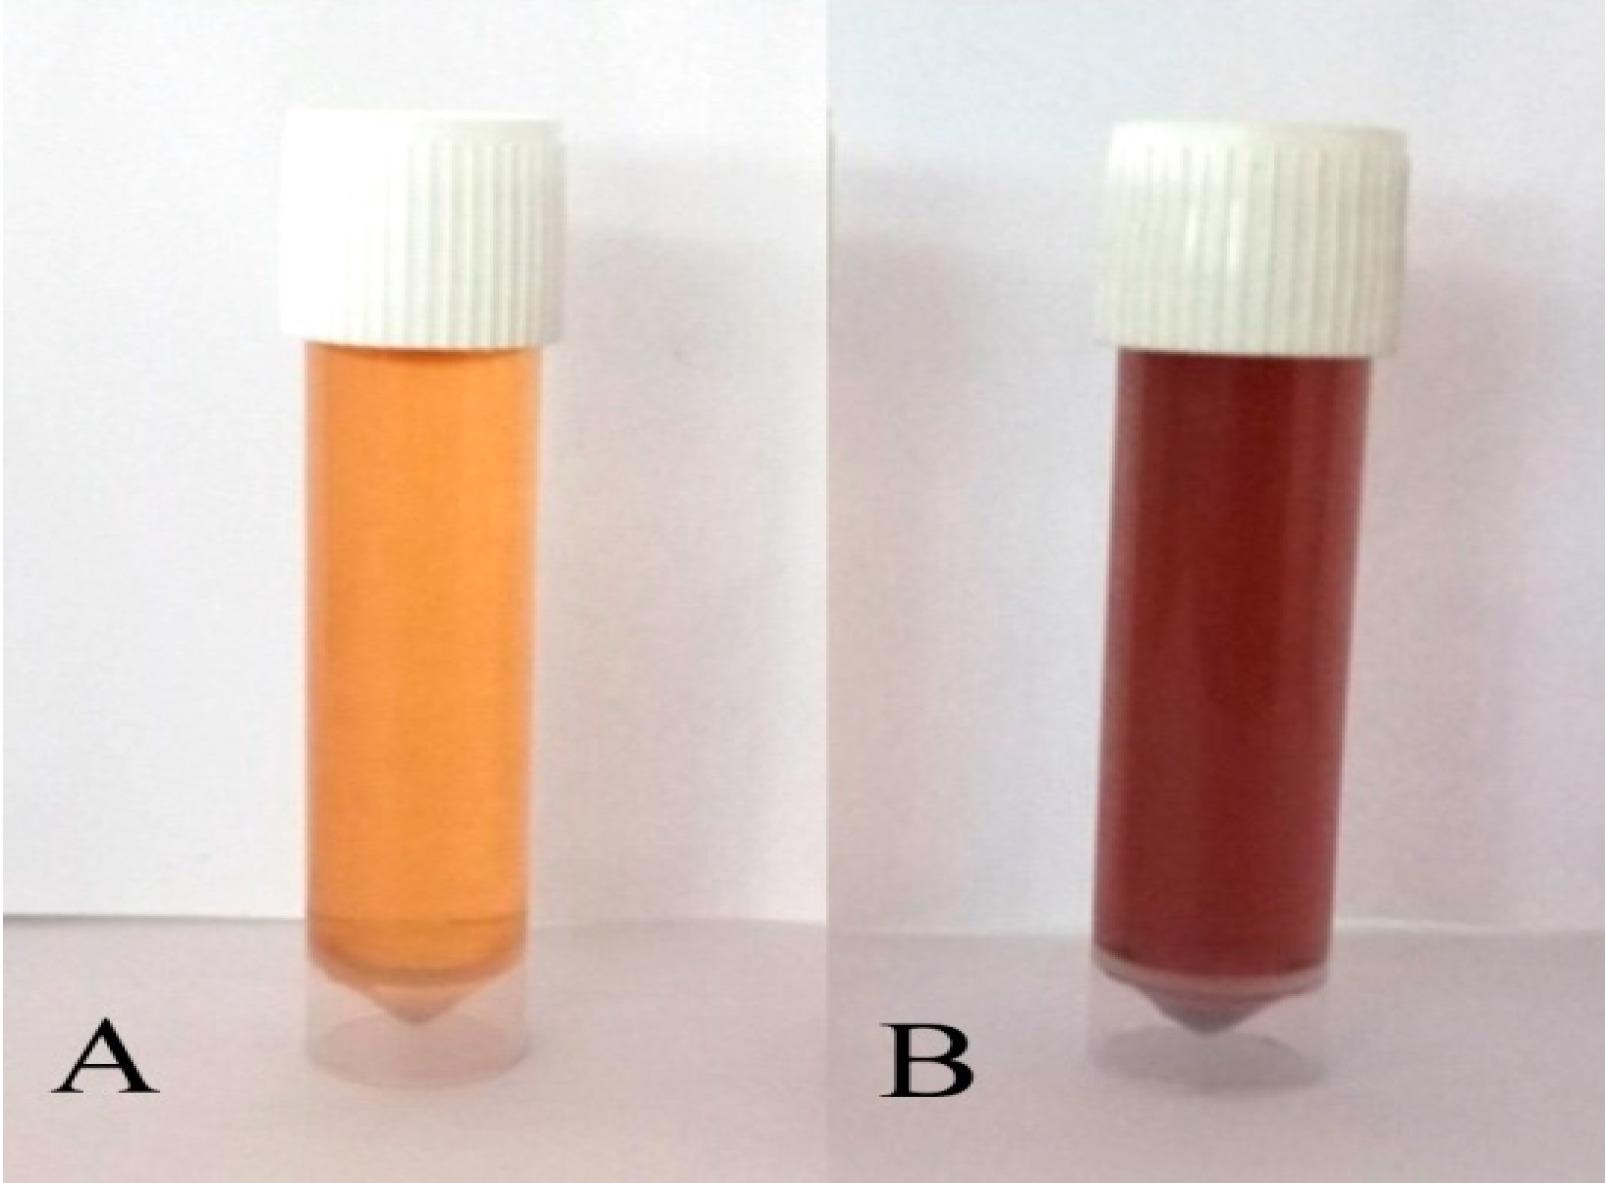 Biosynthesis of P-AgNPs from leaf extract of P. alba: mixture of aqueous Plumeria alba leaf extract and AgNO3 solution (A) before incubation and (B) after incubation.